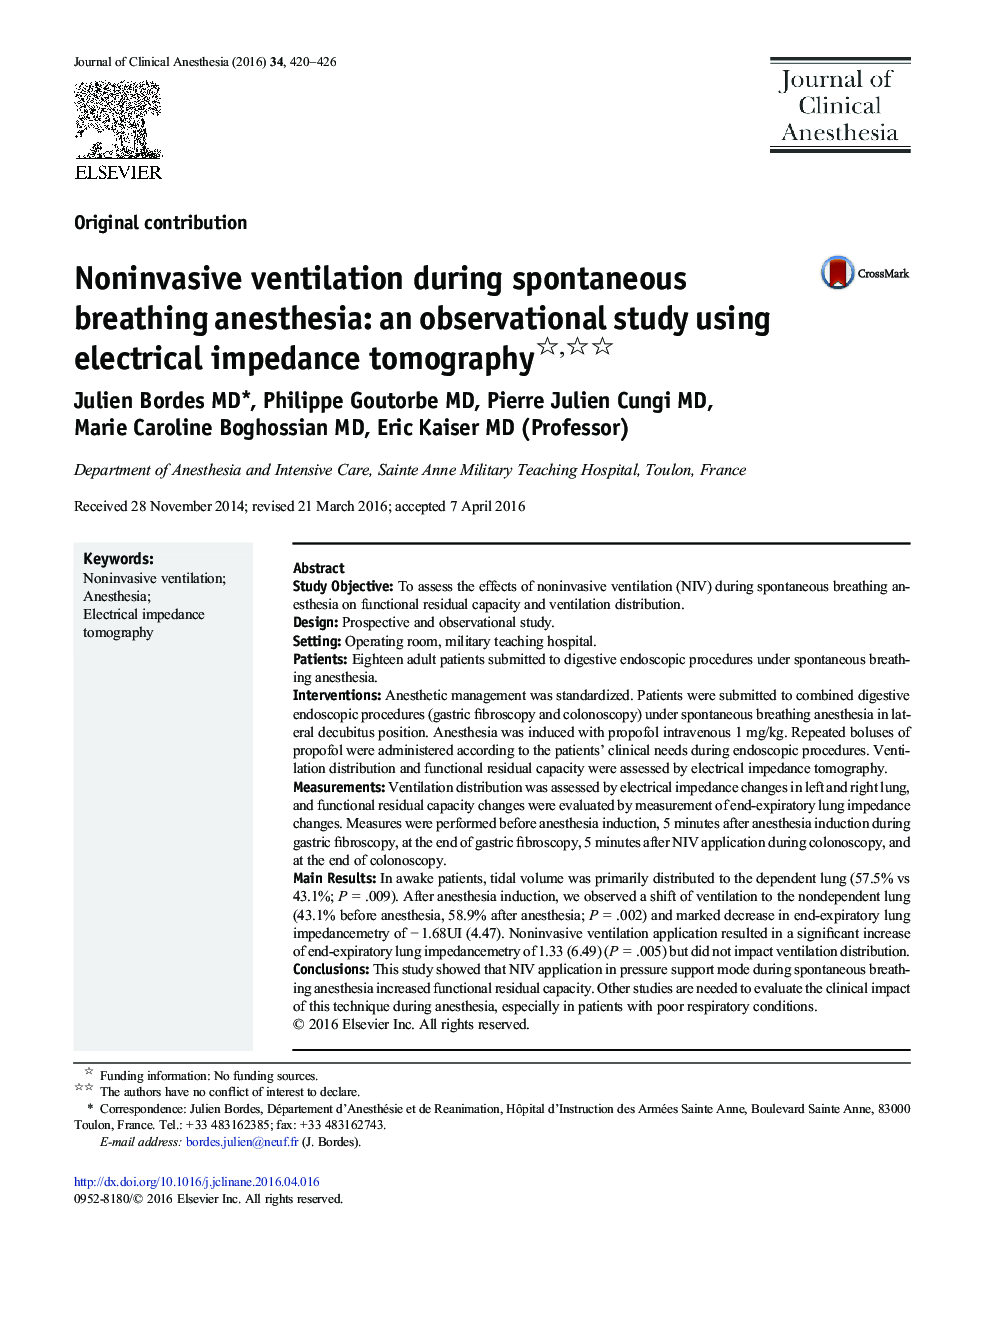 Noninvasive ventilation during spontaneous breathing anesthesia: an observational study using electrical impedance tomography